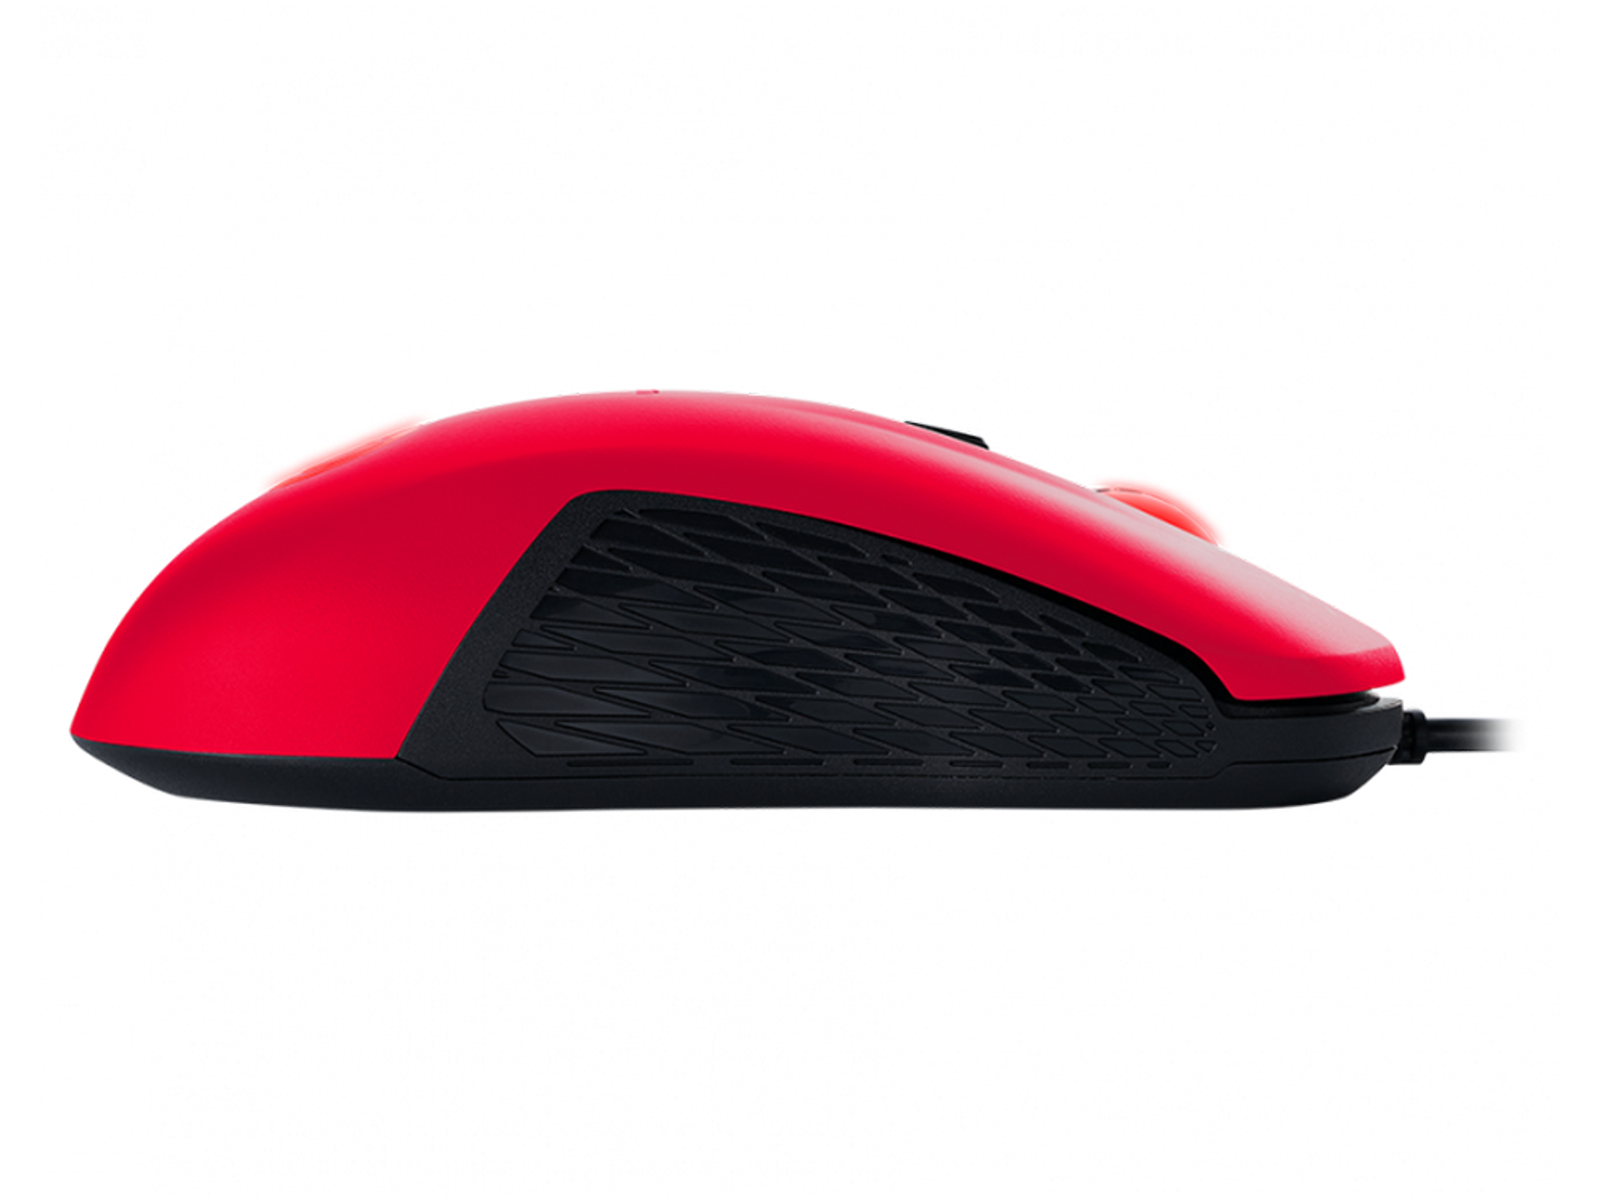 GAMING NACON PC NA374445 RED GM-110 MOUSE Maus, Rot